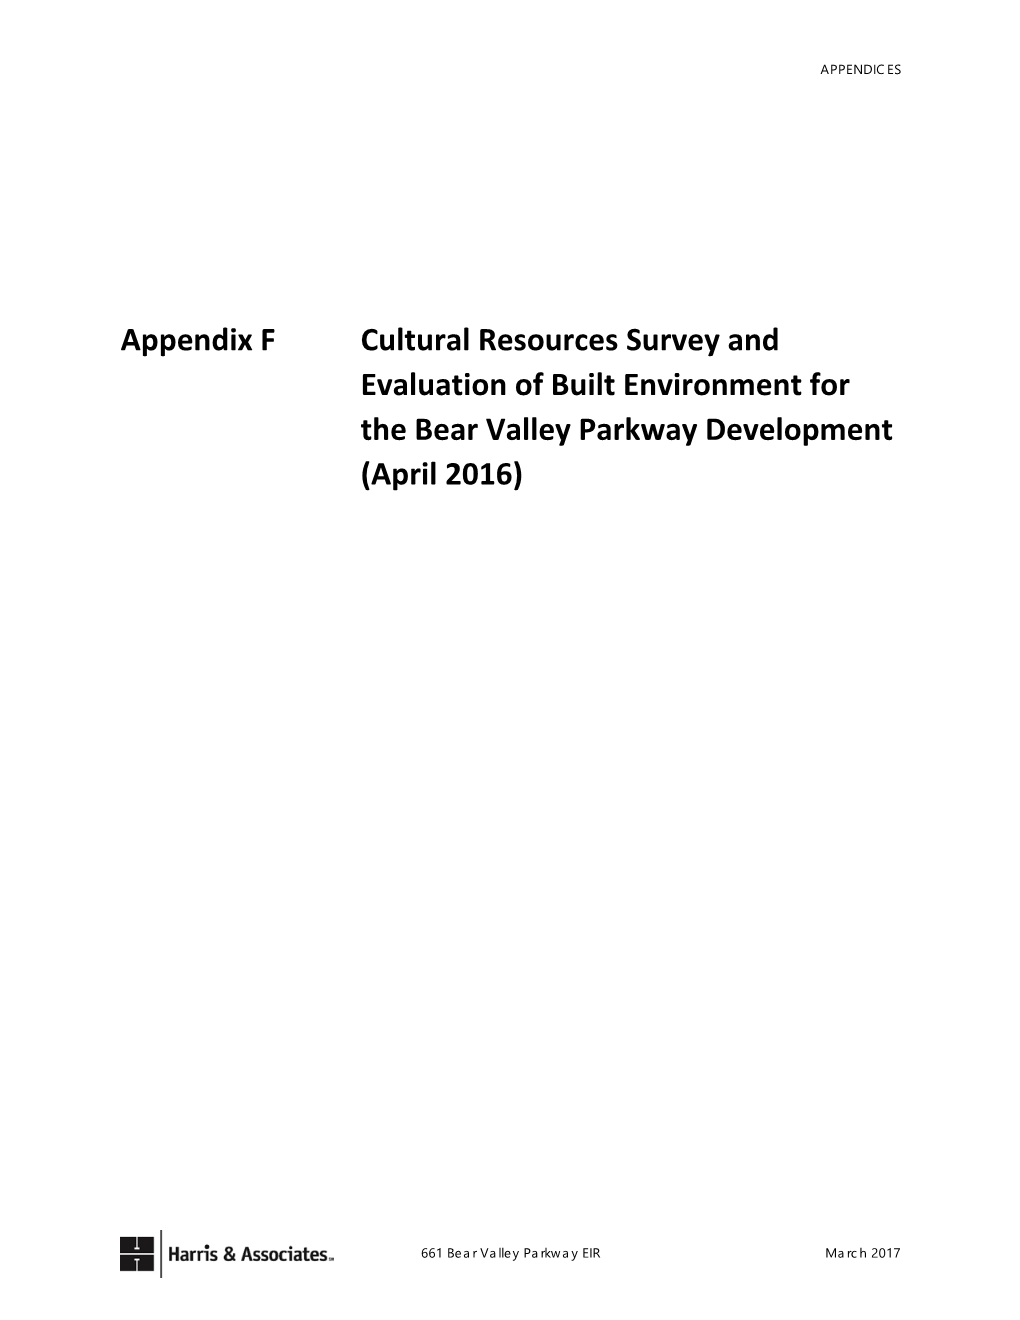 Appendix F Cultural Resources Survey and Evaluation of Built Environment for the Bear Valley Parkway Development (April 2016)